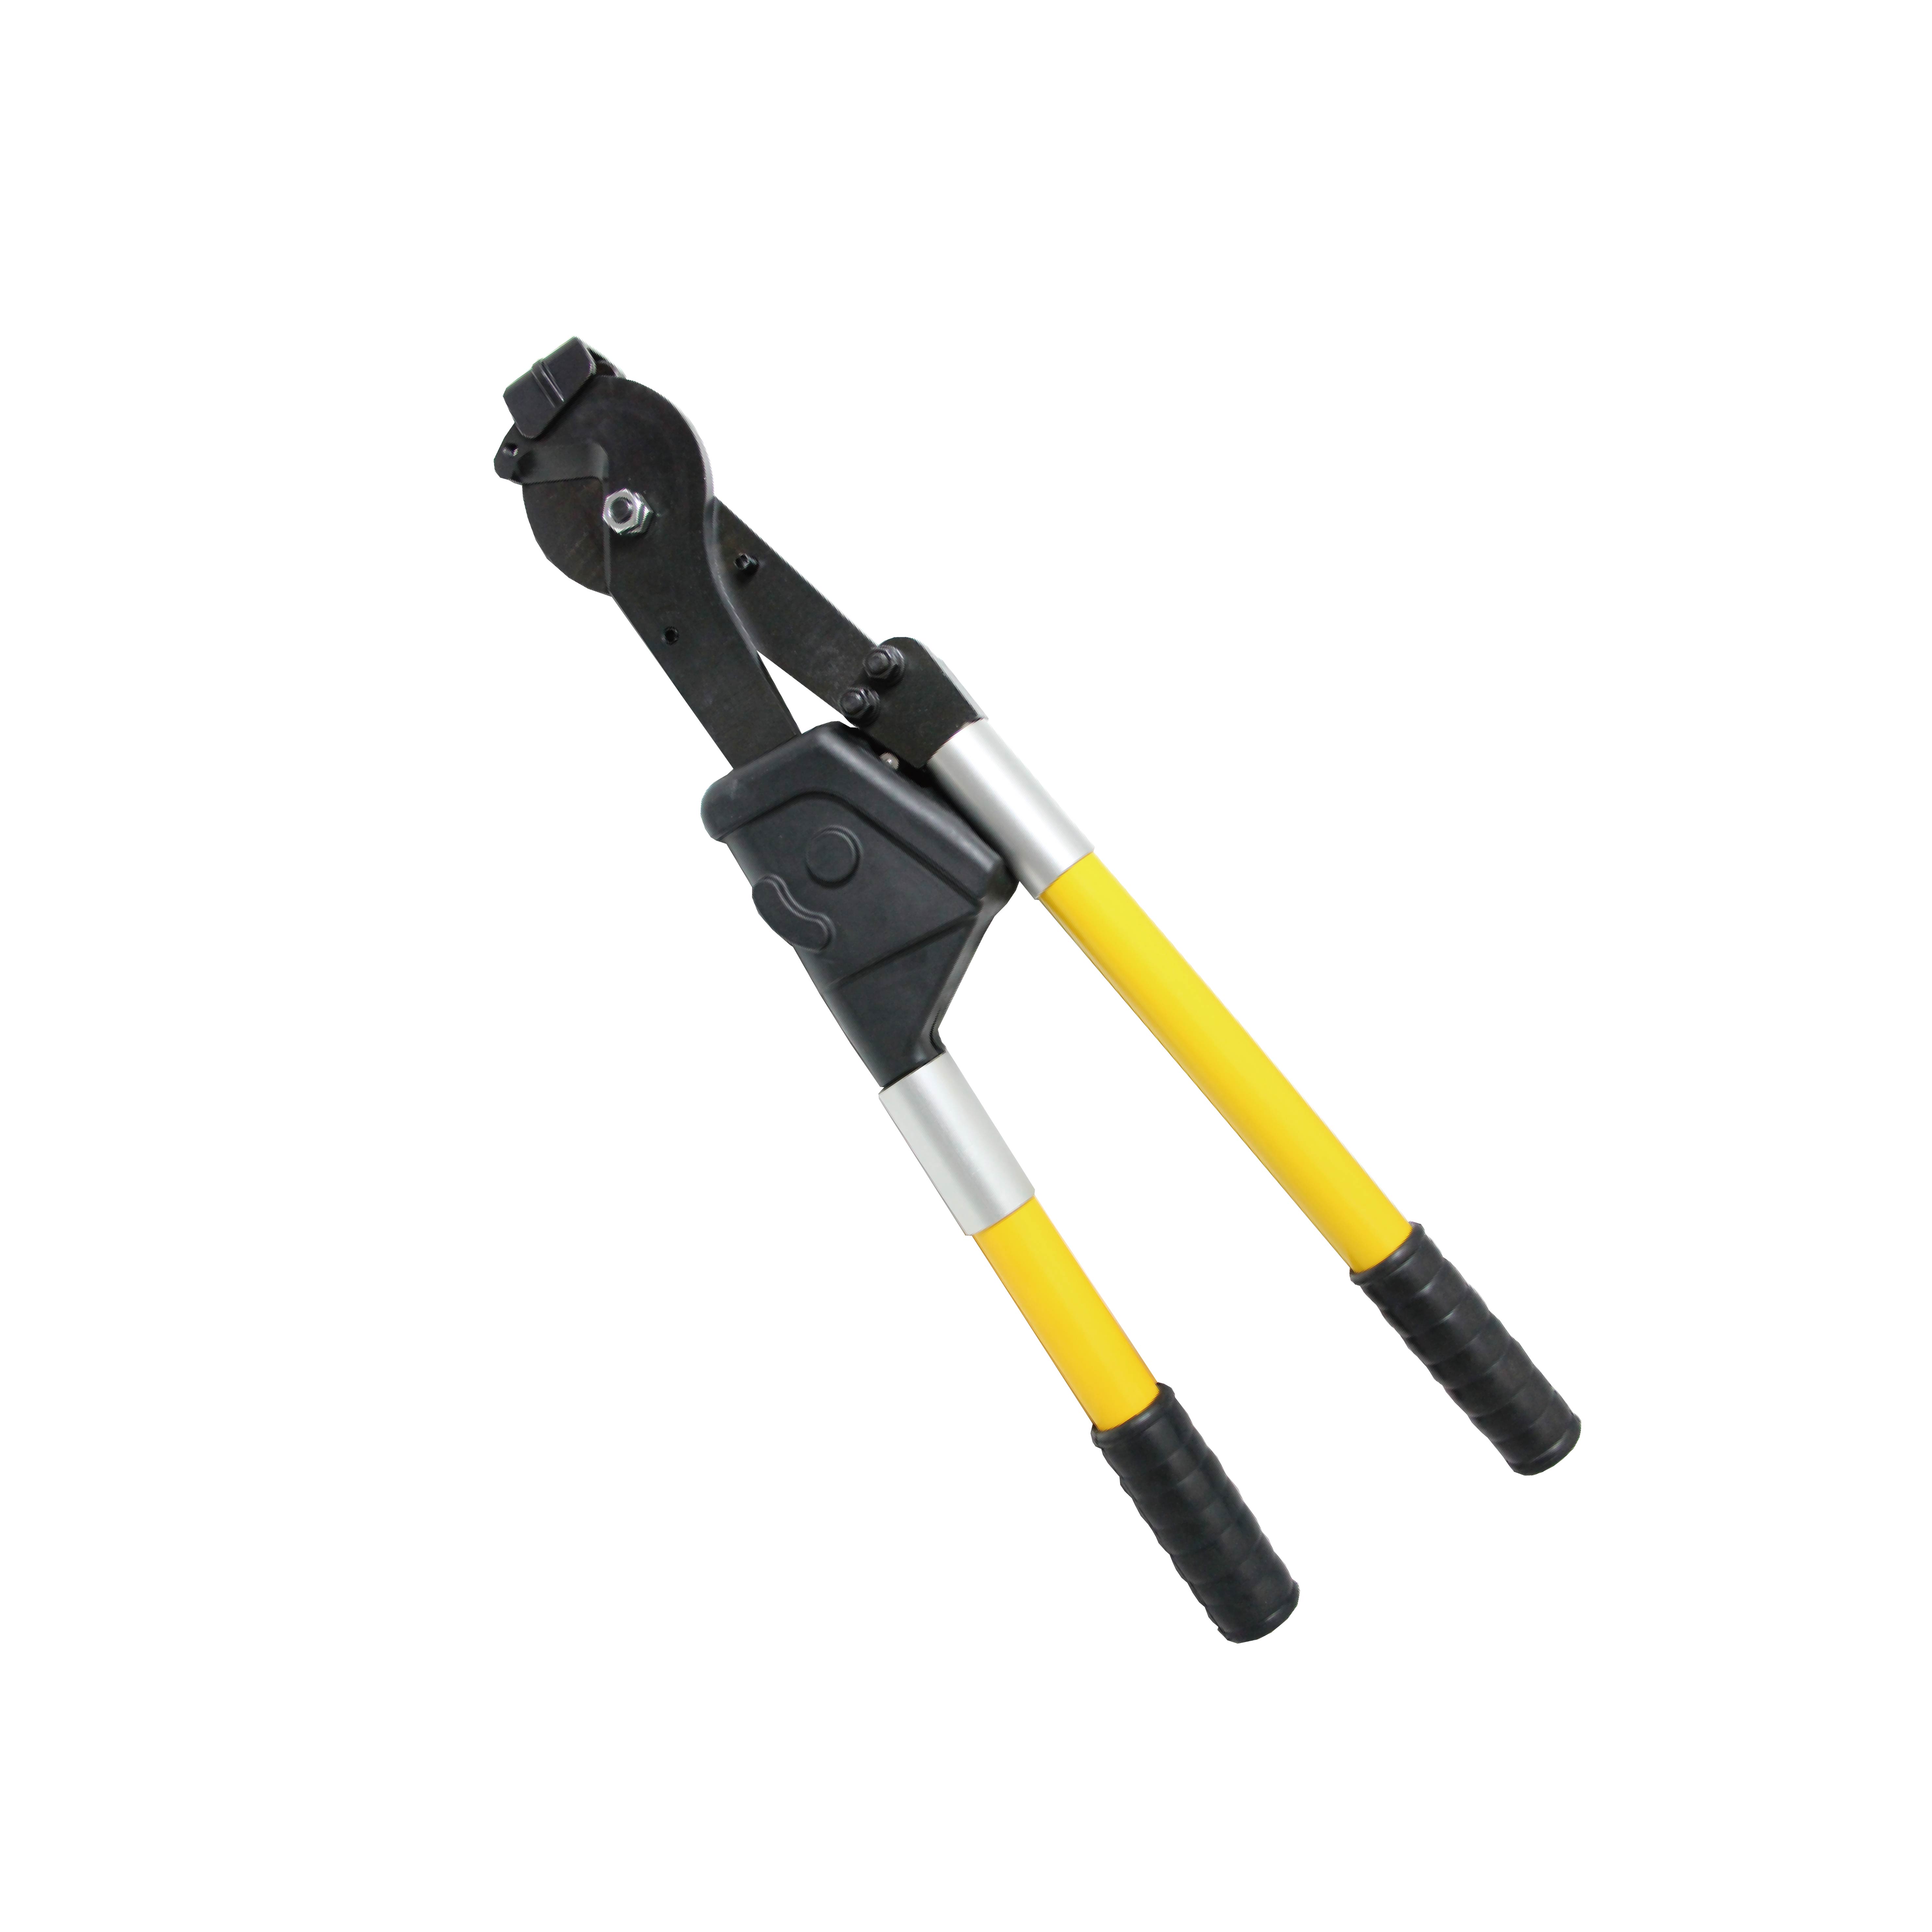 AC-300 HAND CABLE CUTTERS